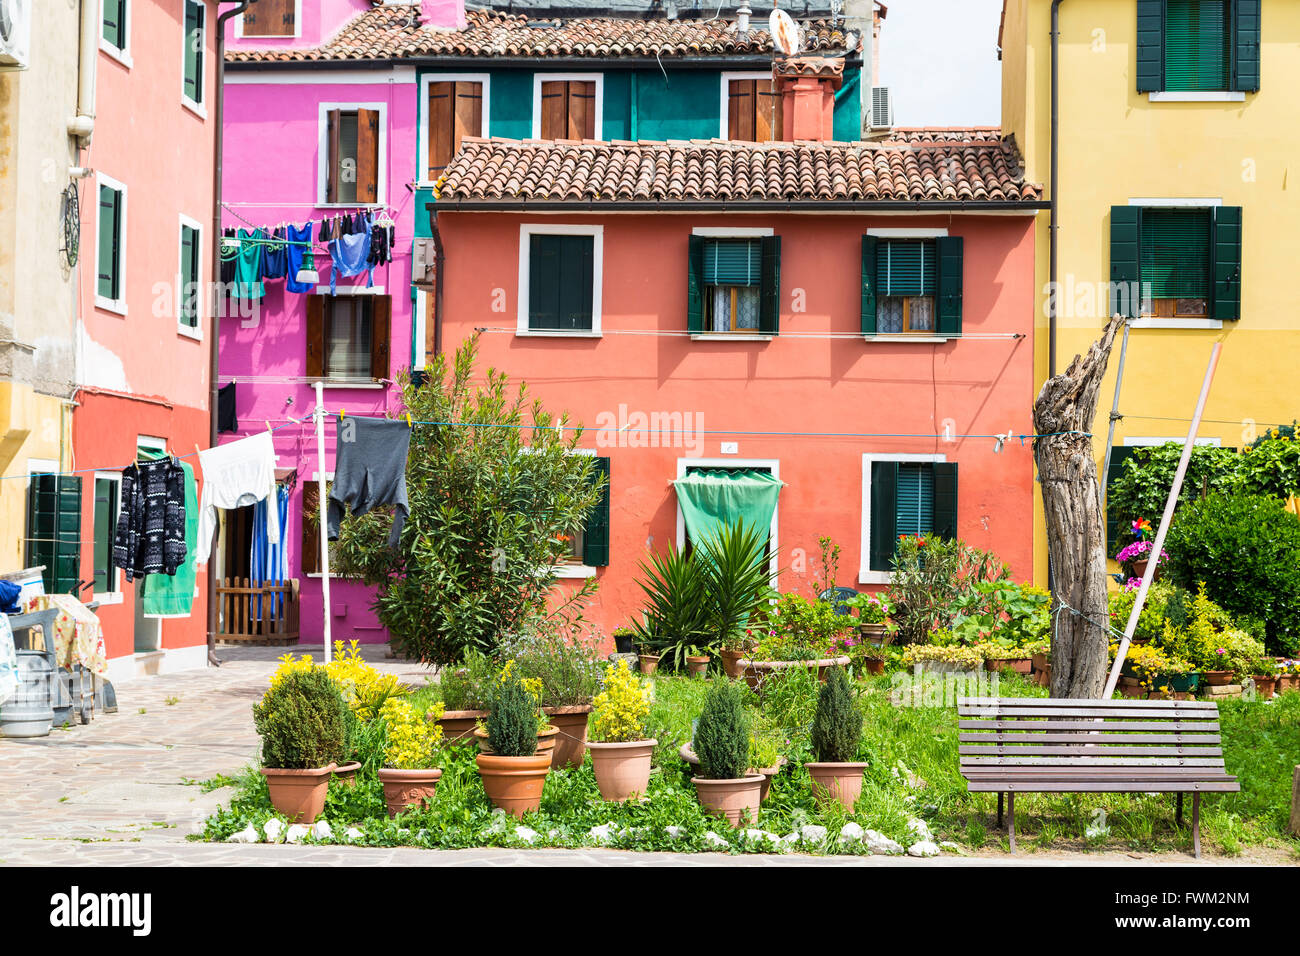 Laundries drying in the middle of the courtyard between traditional colorful houses in Burano island, Venice Stock Photo